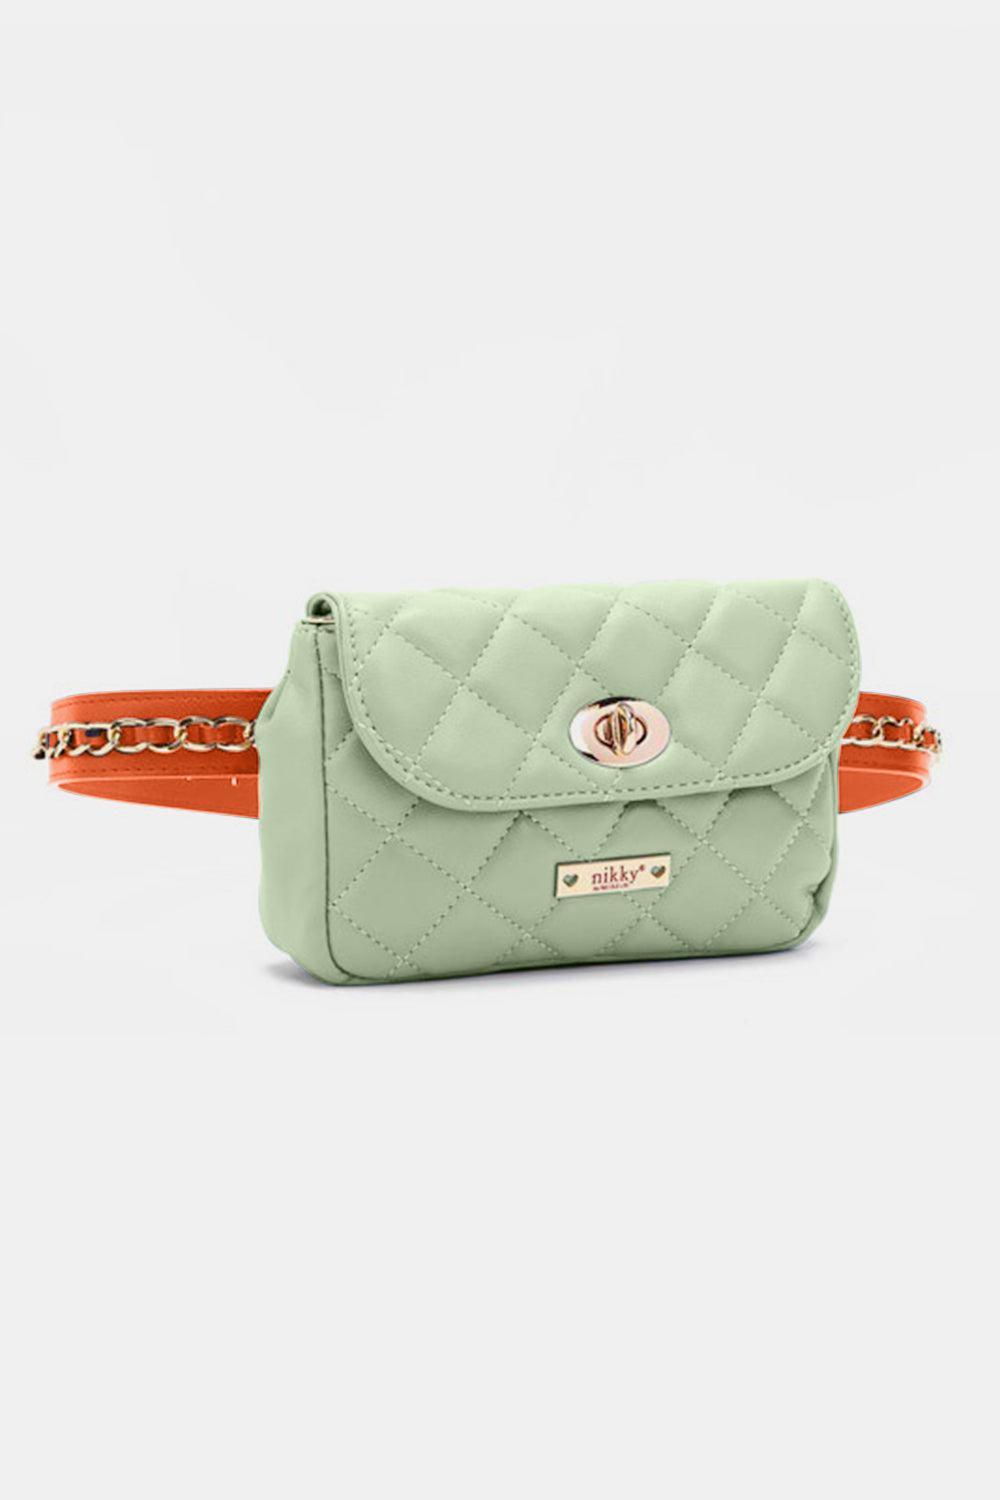 a small green purse with a chain strap